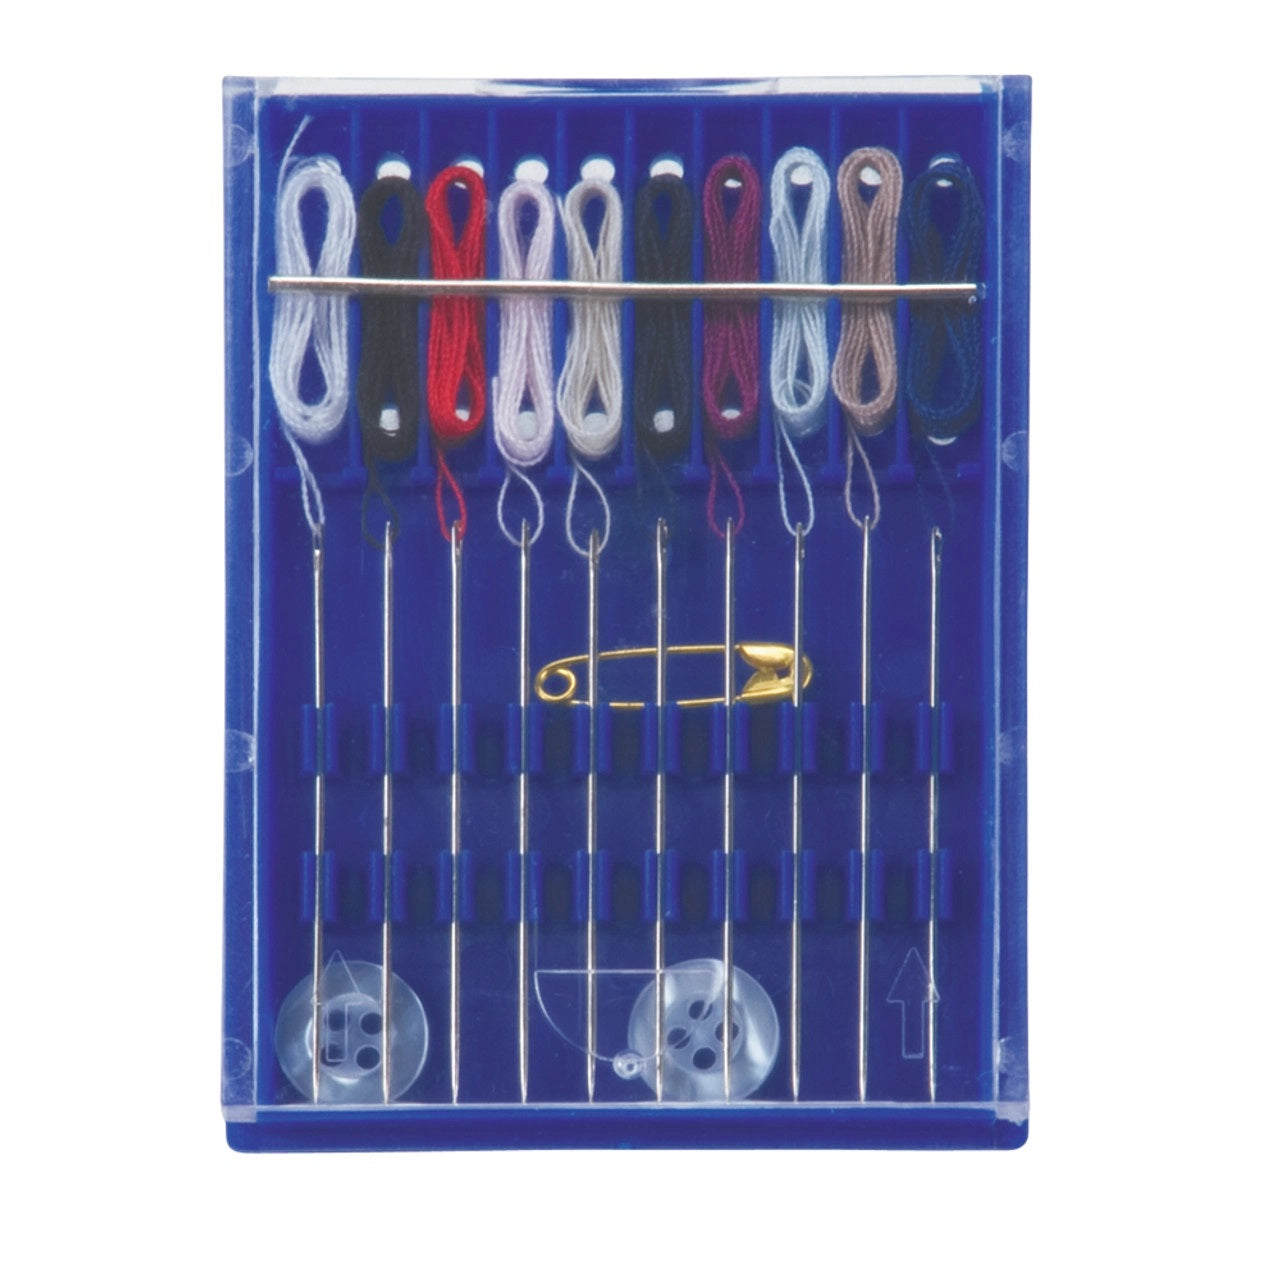 Pre-Threaded Sewing Needles with multi colored thread in a blue case.